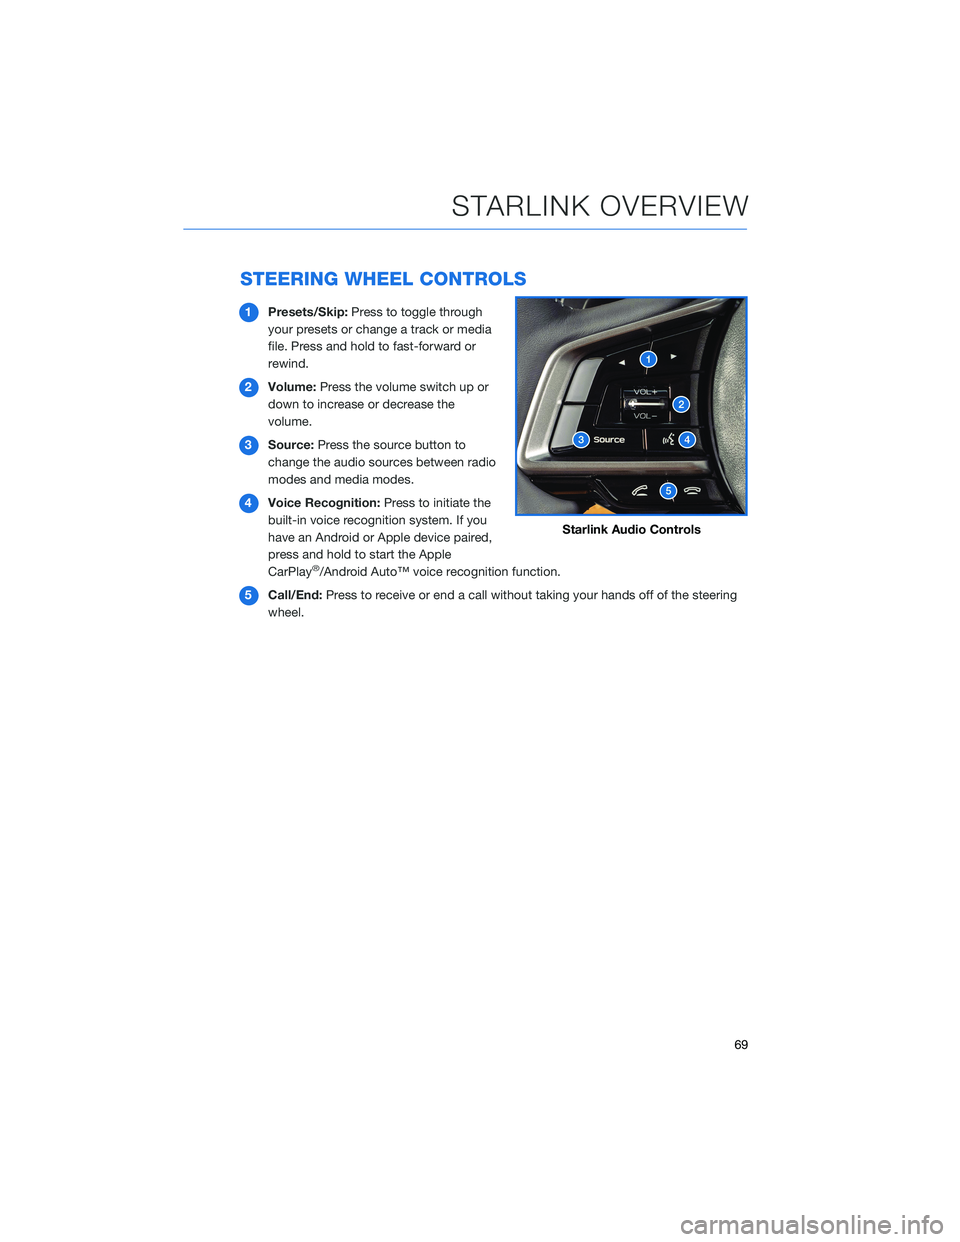 SUBARU OUTBACK 2021  Getting Started Guide STEERING WHEEL CONTROLS
1Presets/Skip:Press to toggle through
your presets or change a track or media
file. Press and hold to fast-forward or
rewind.
2Volume:Press the volume switch up or
down to incr